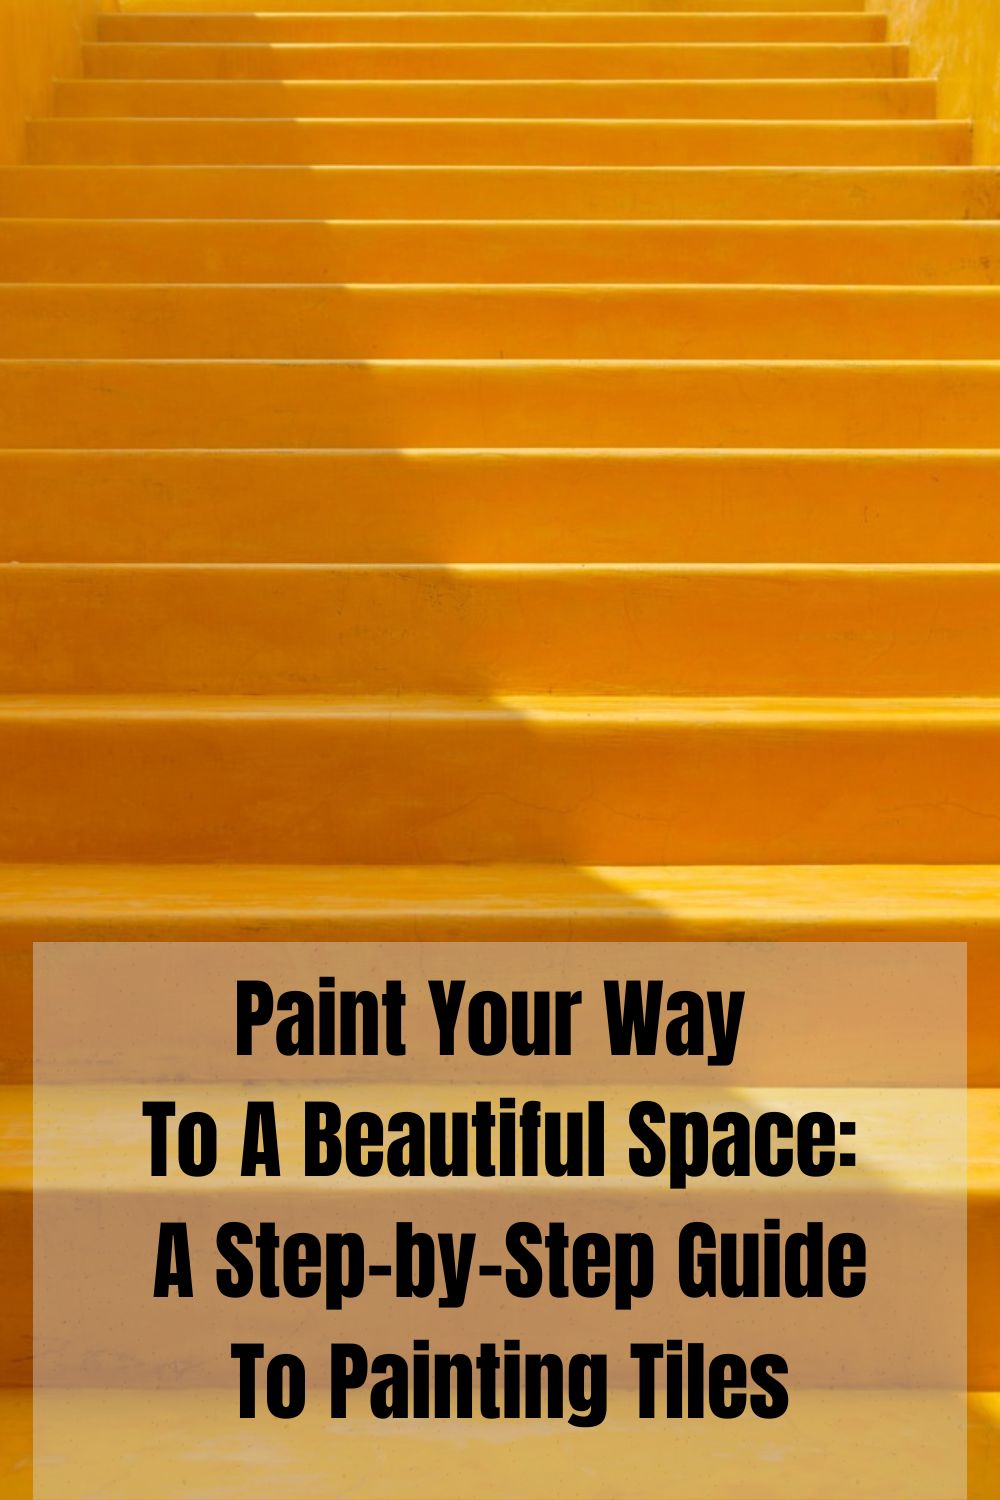 Paint Your Way To A Beautiful Space